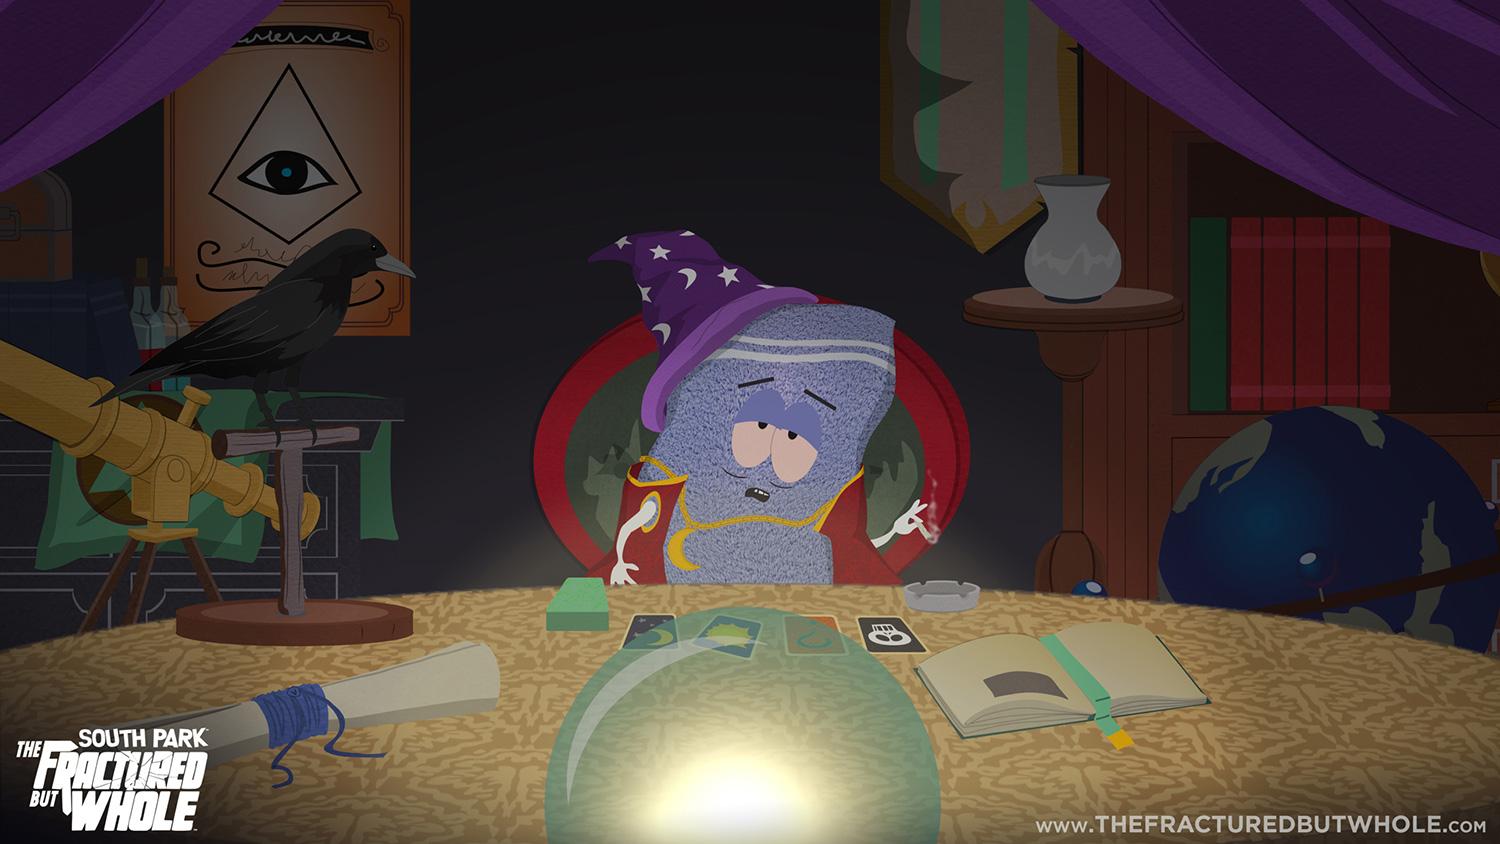 South Park Fractured but Whole screenshot 6